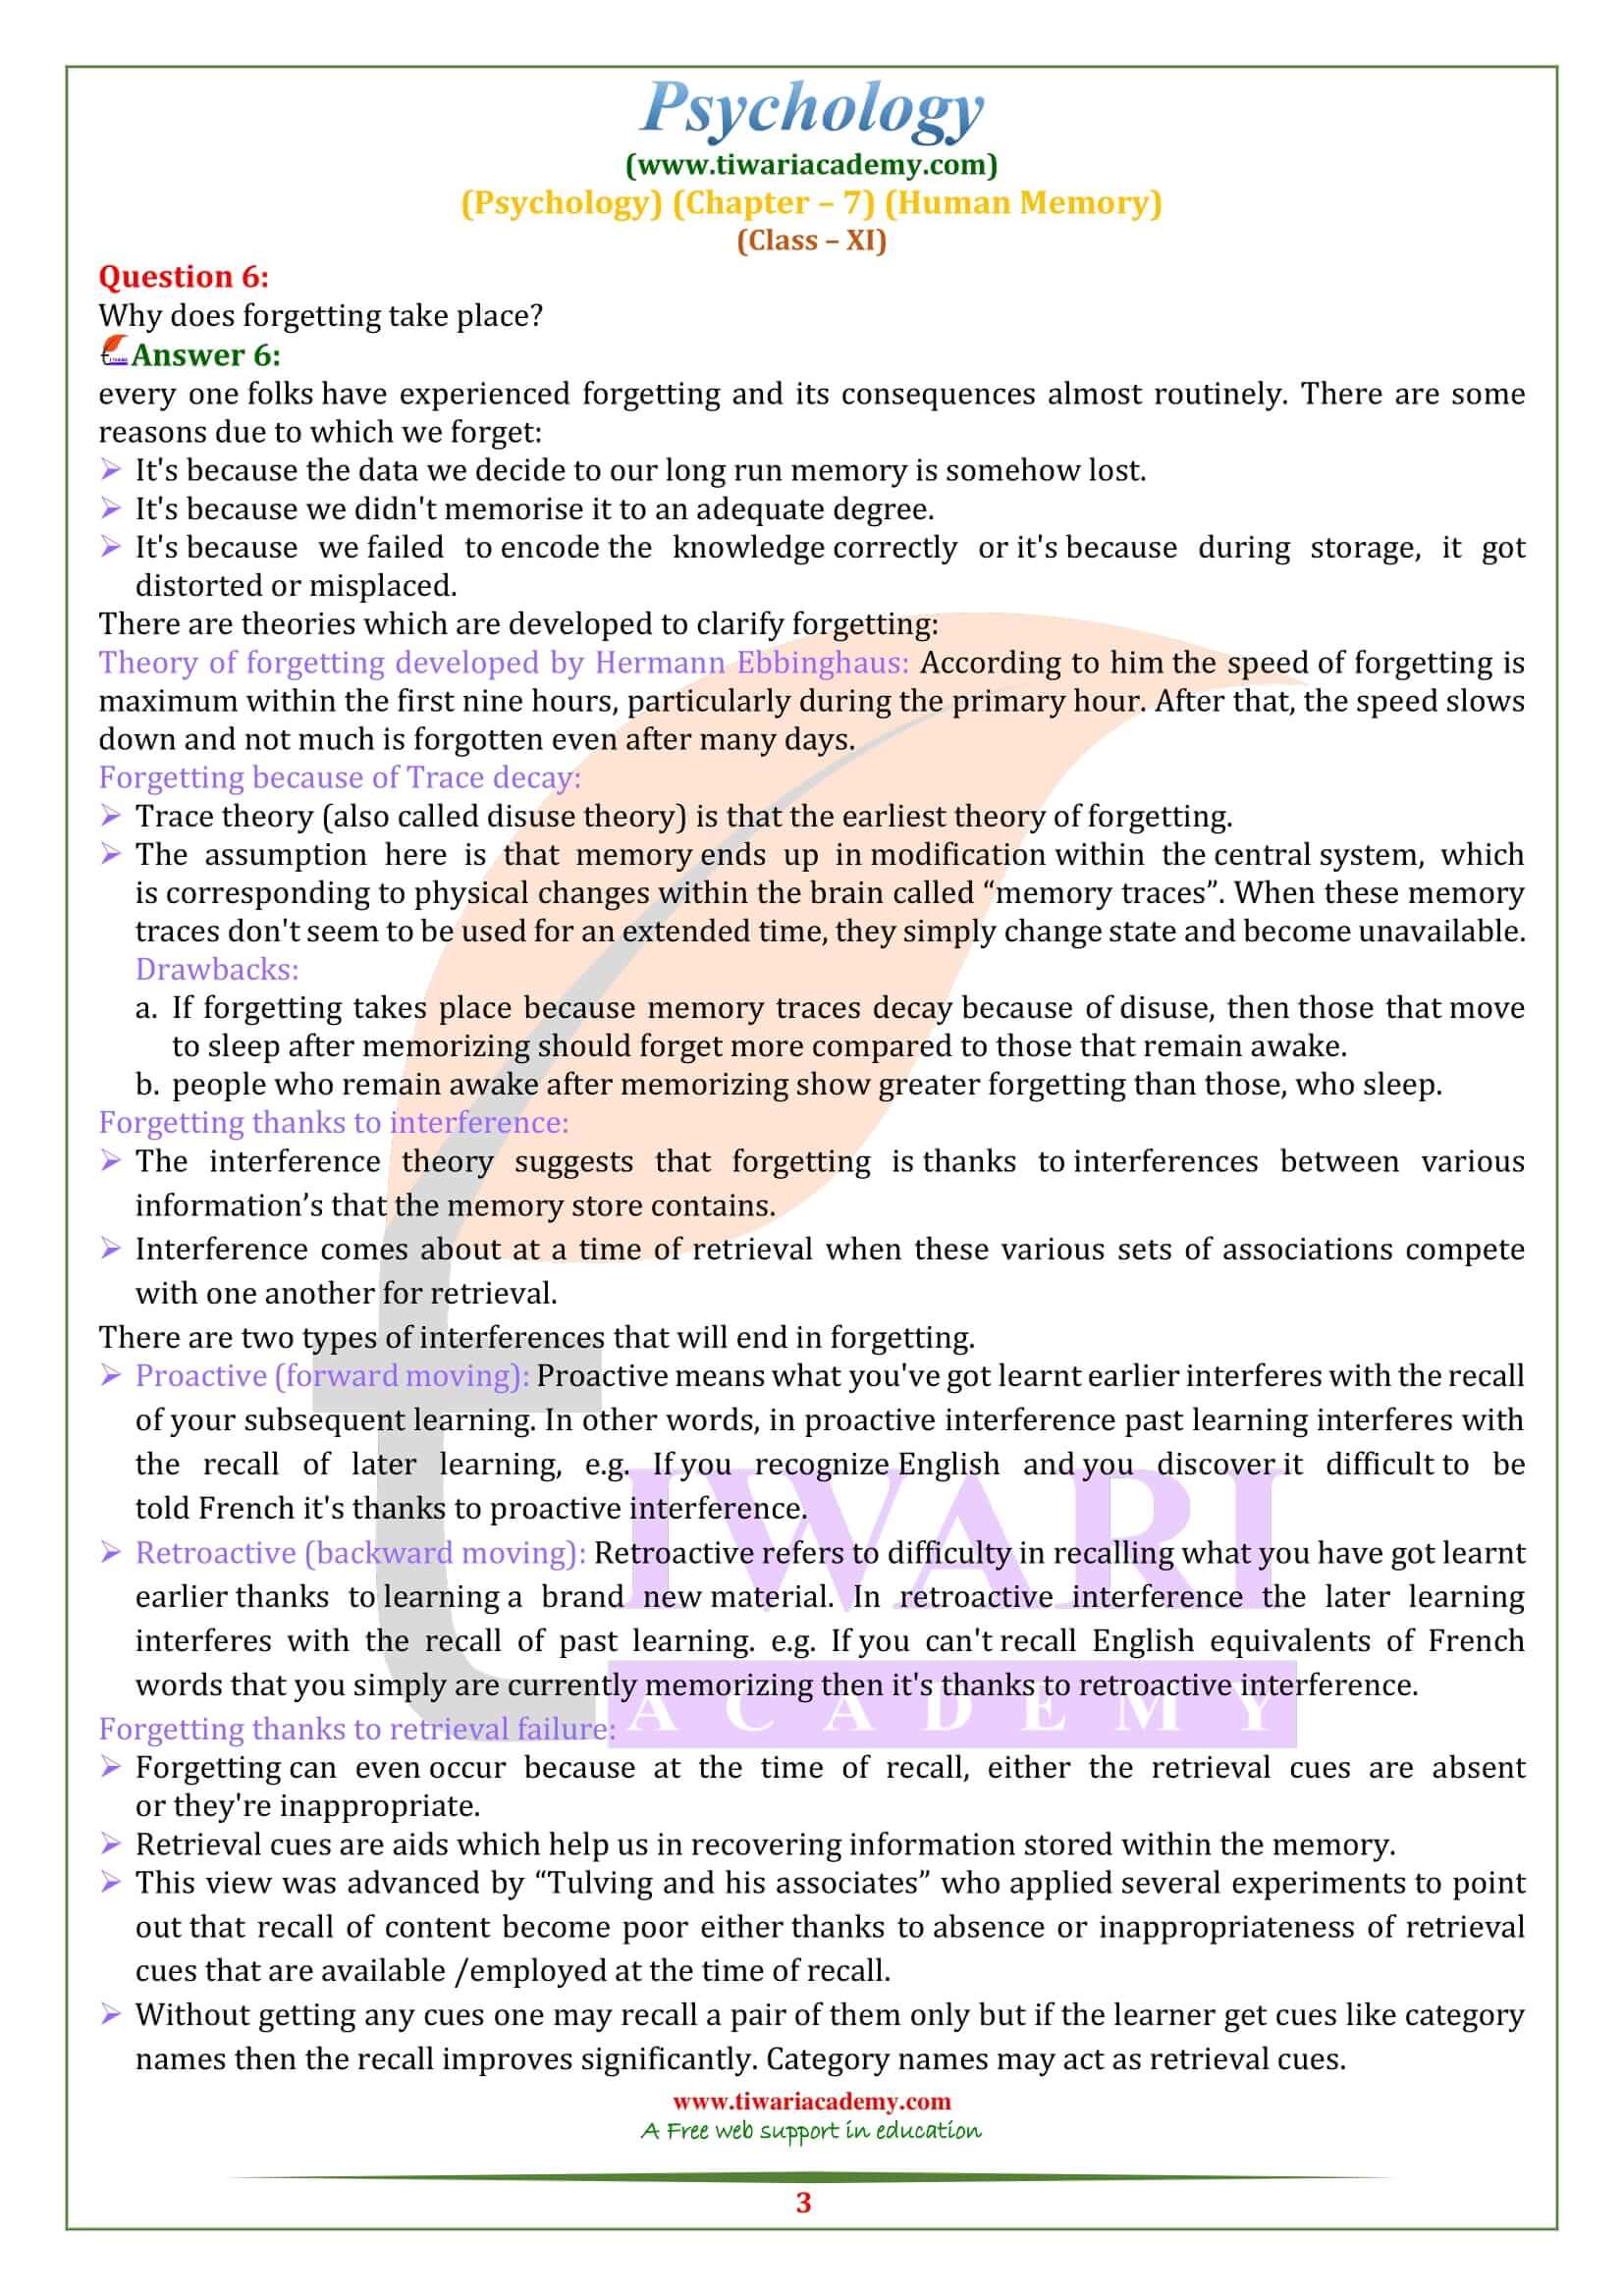 NCERT Solutions for Class 11 Psychology Chapter 7 in English Medium